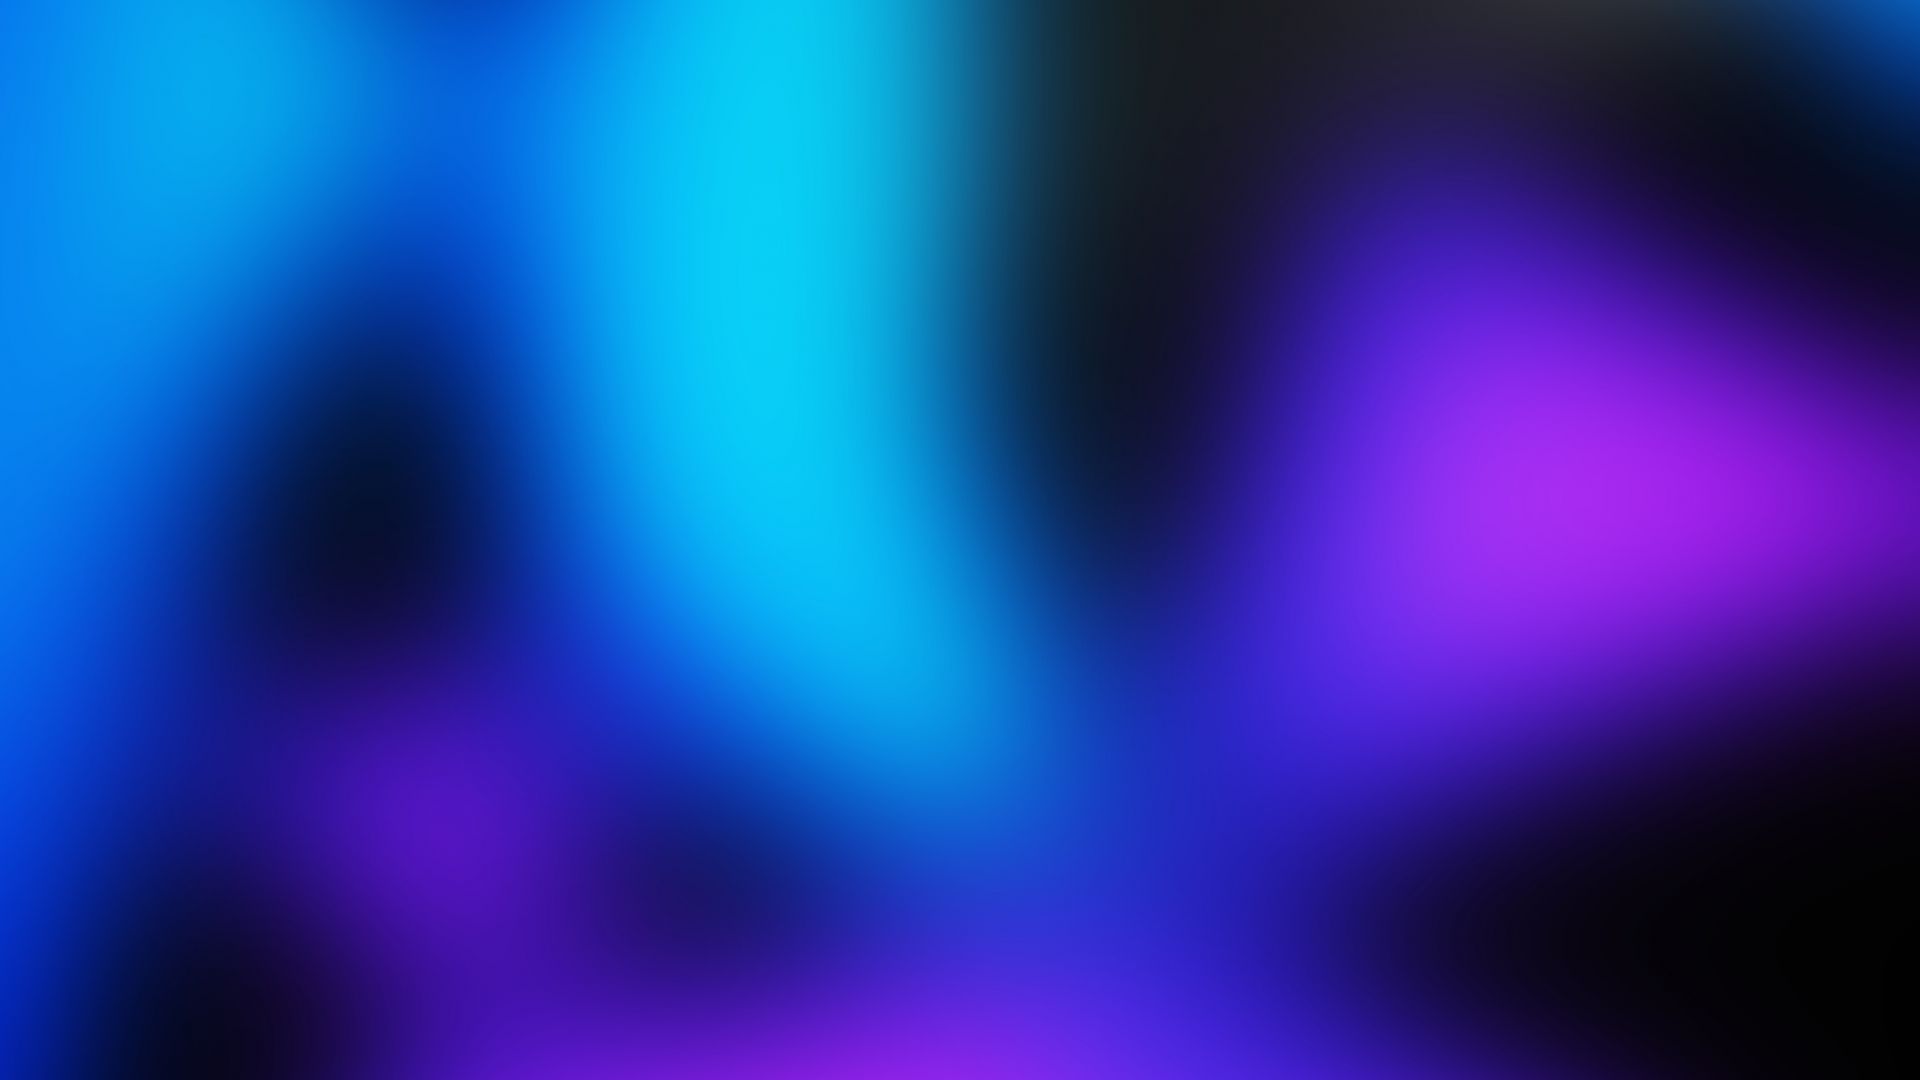 Neon Gradient Glowing Shapes Wallpapers